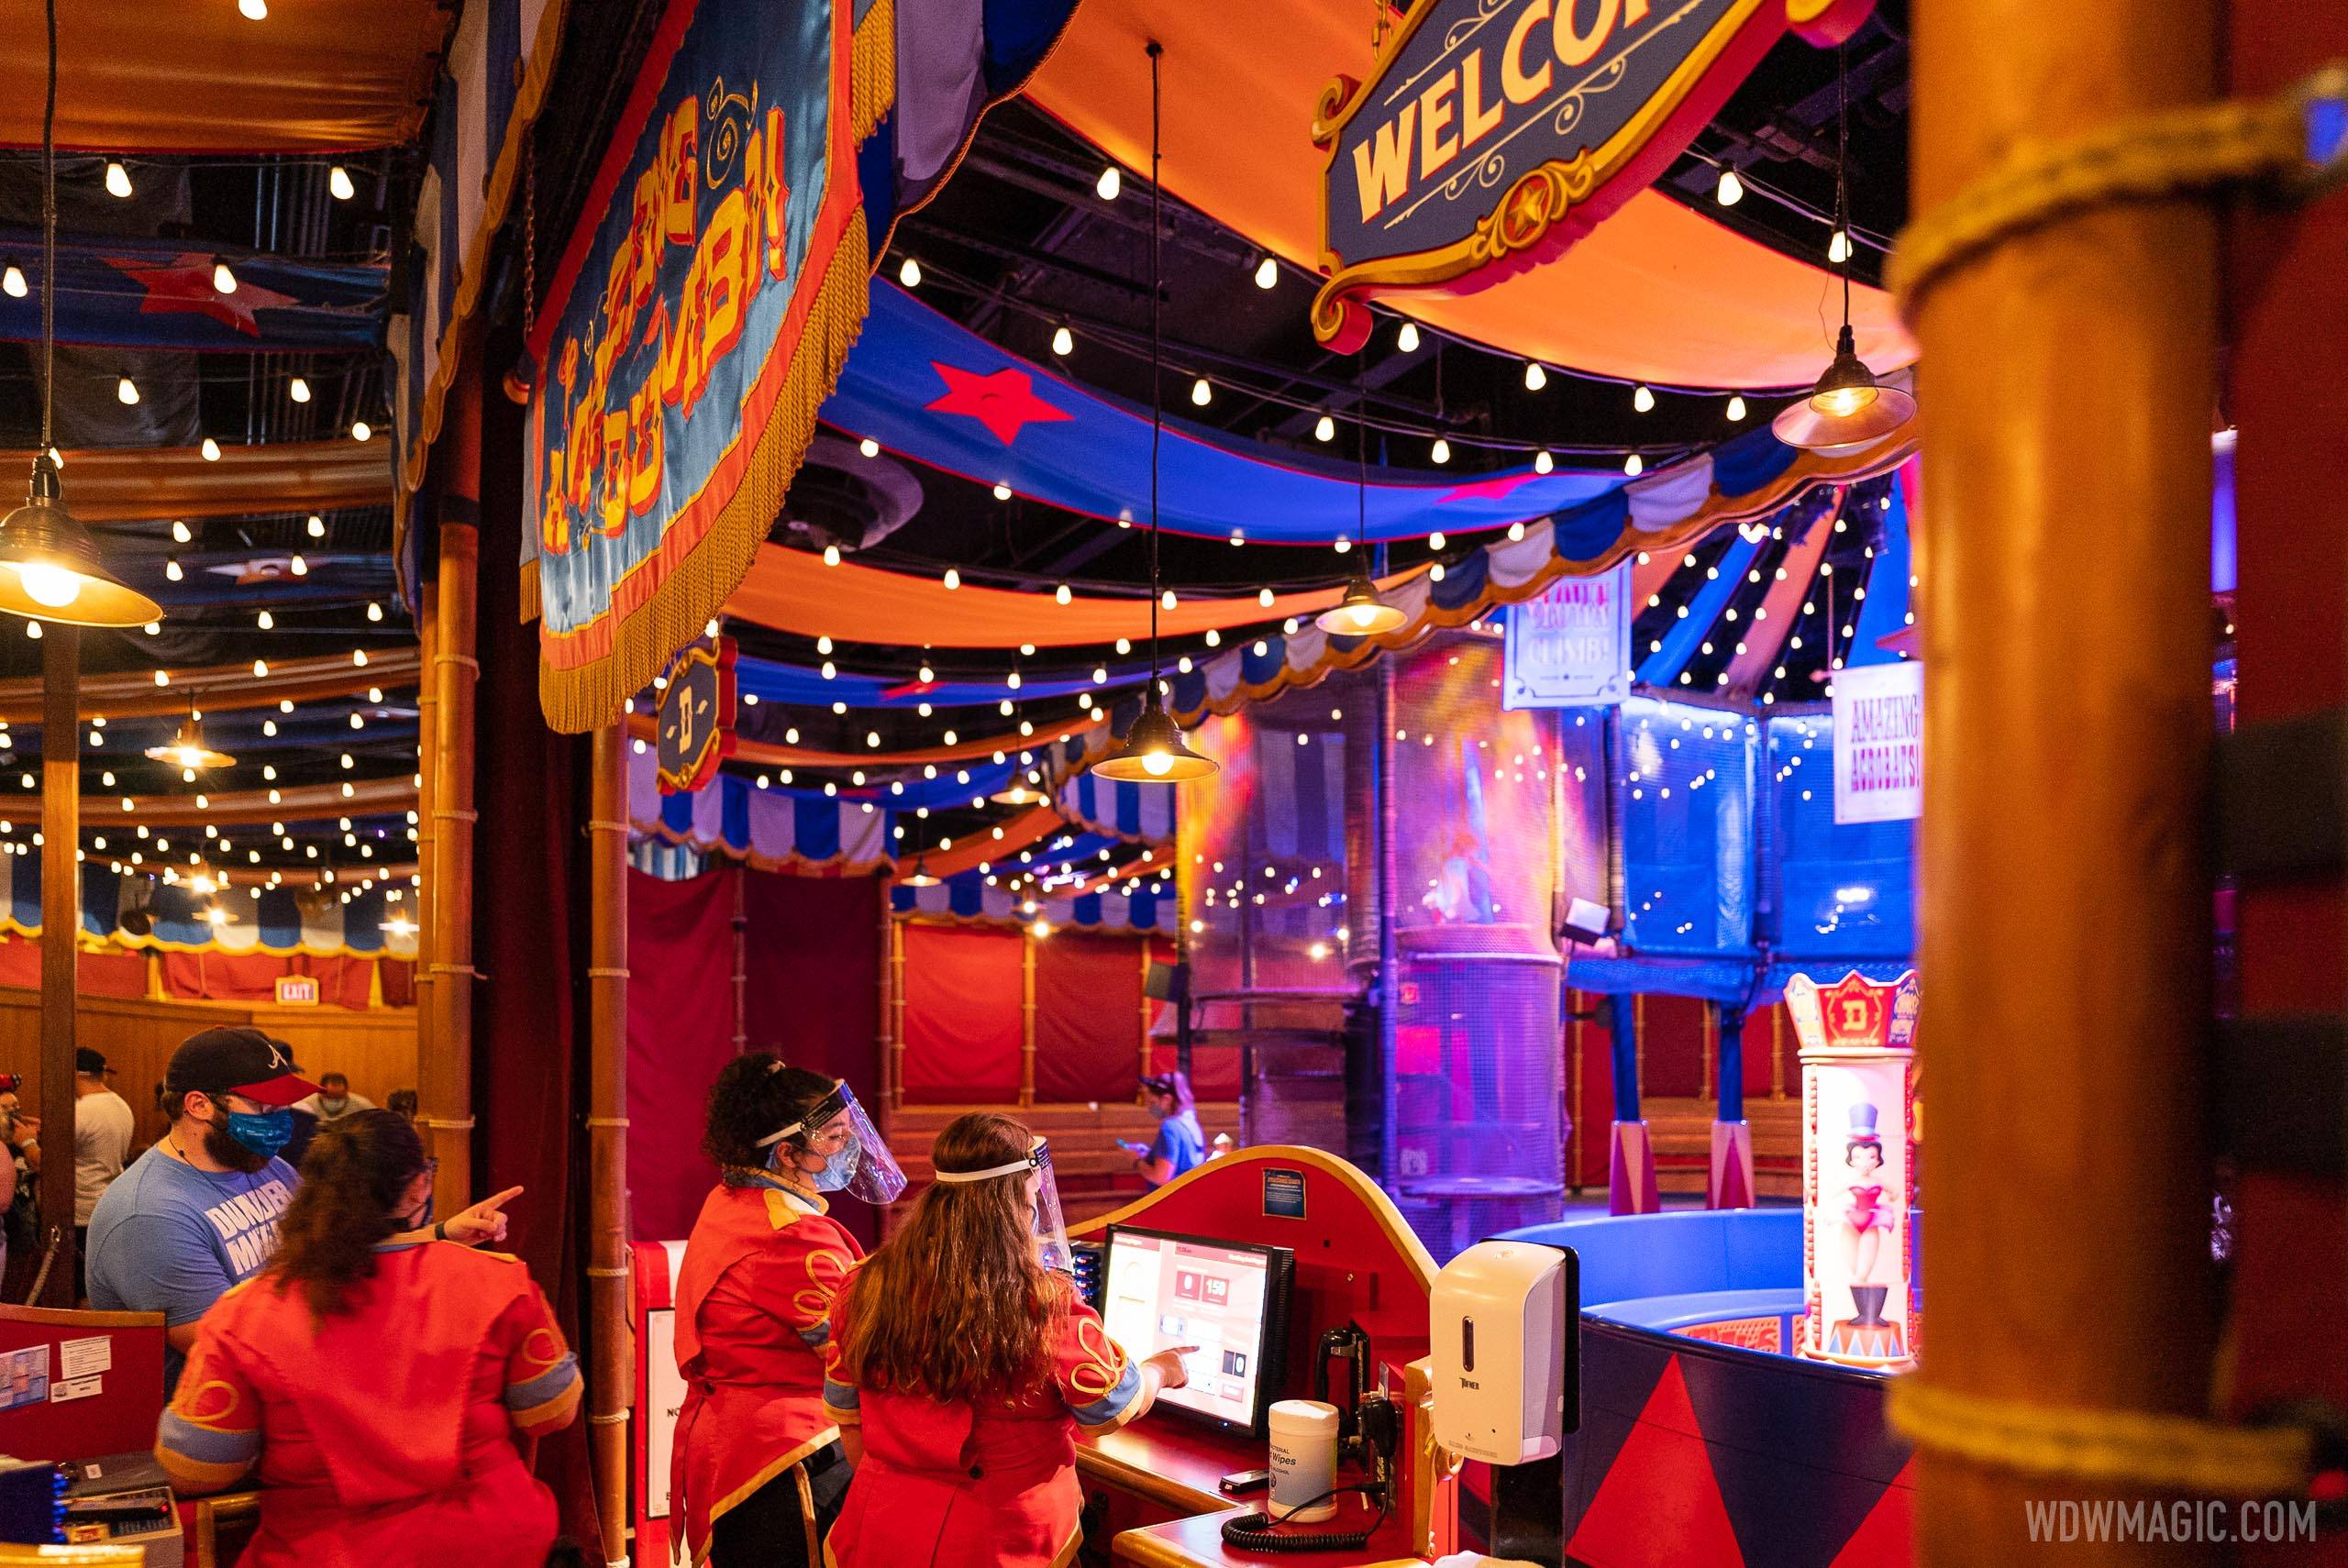 Indoor playgrounds reopen at Walt Disney World theme parks